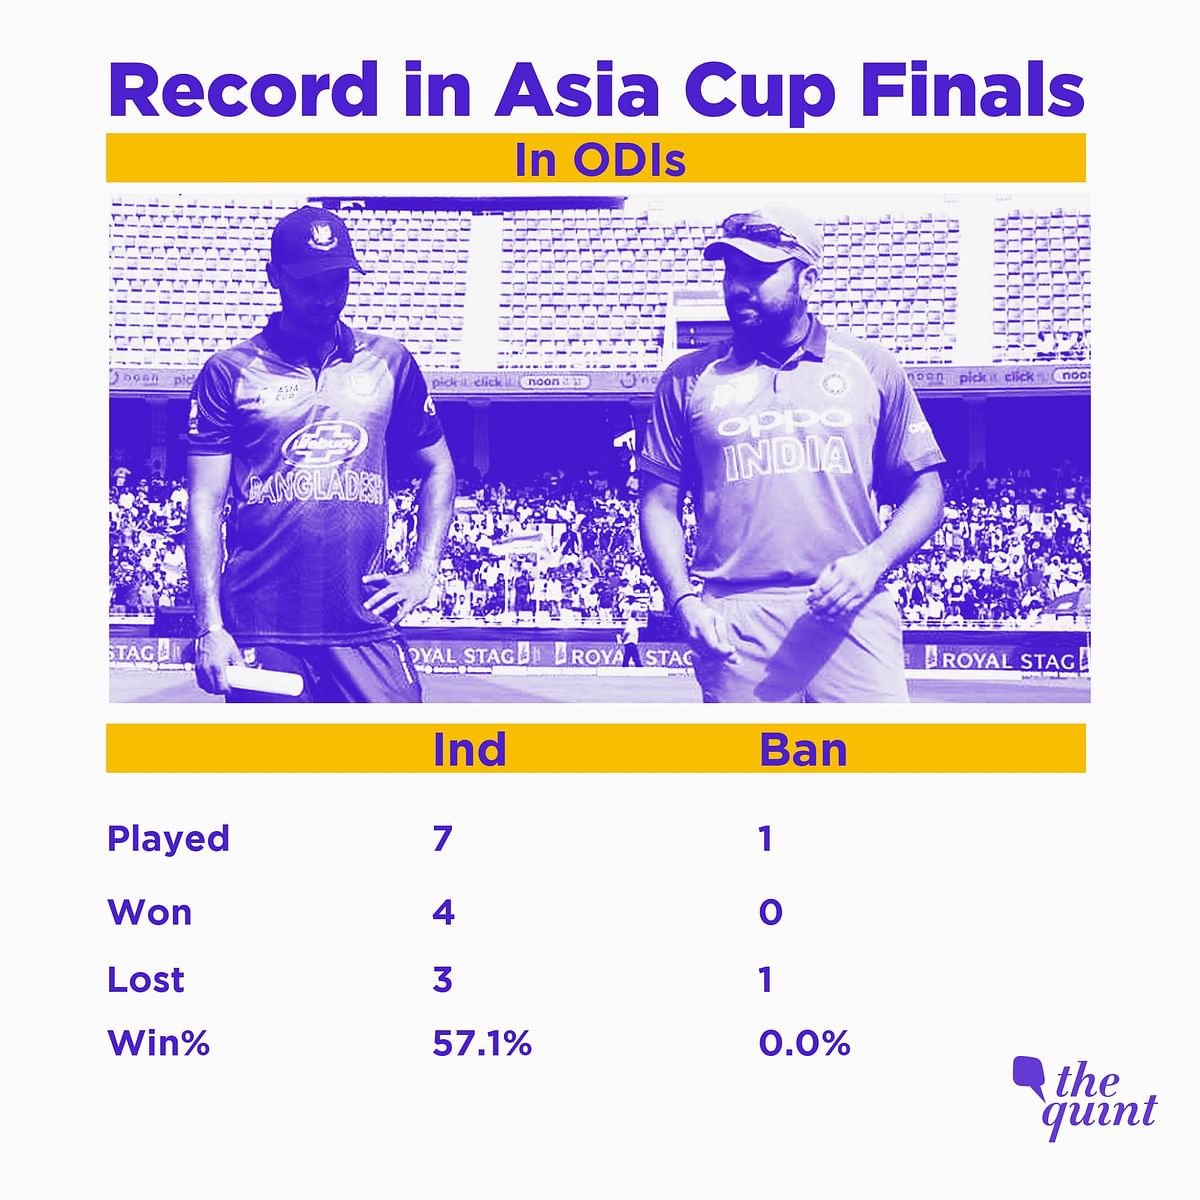 India’s dominant form in recent times makes them overwhelming favourites to win the Asia Cup again.